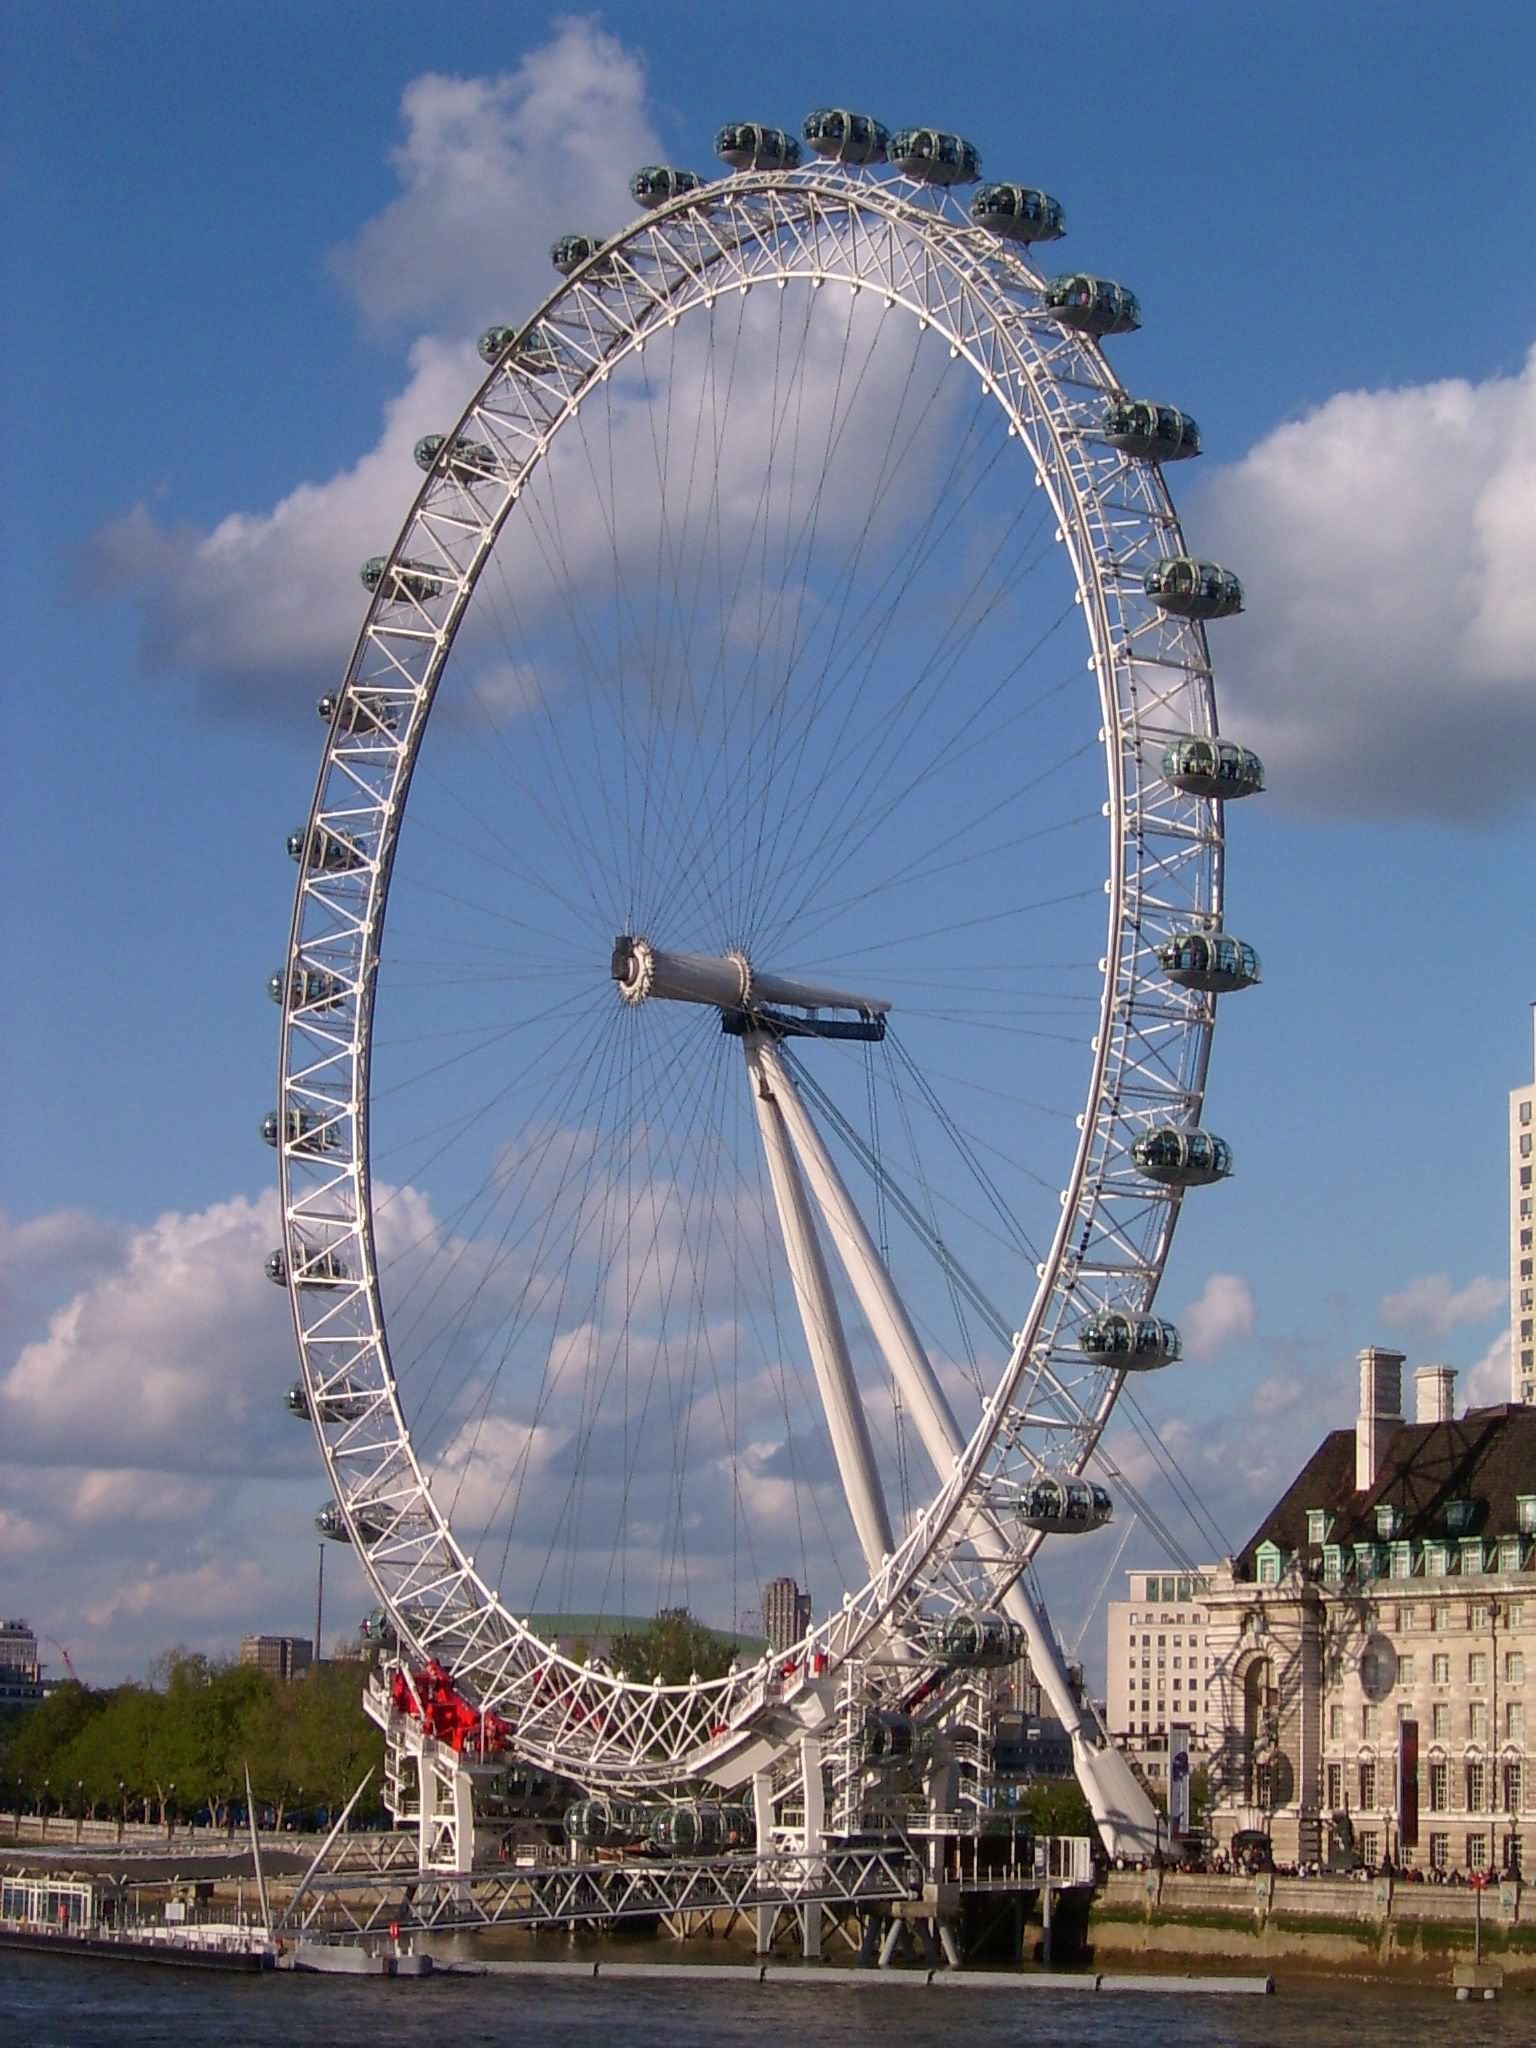 Day Time Picture Of London Eye